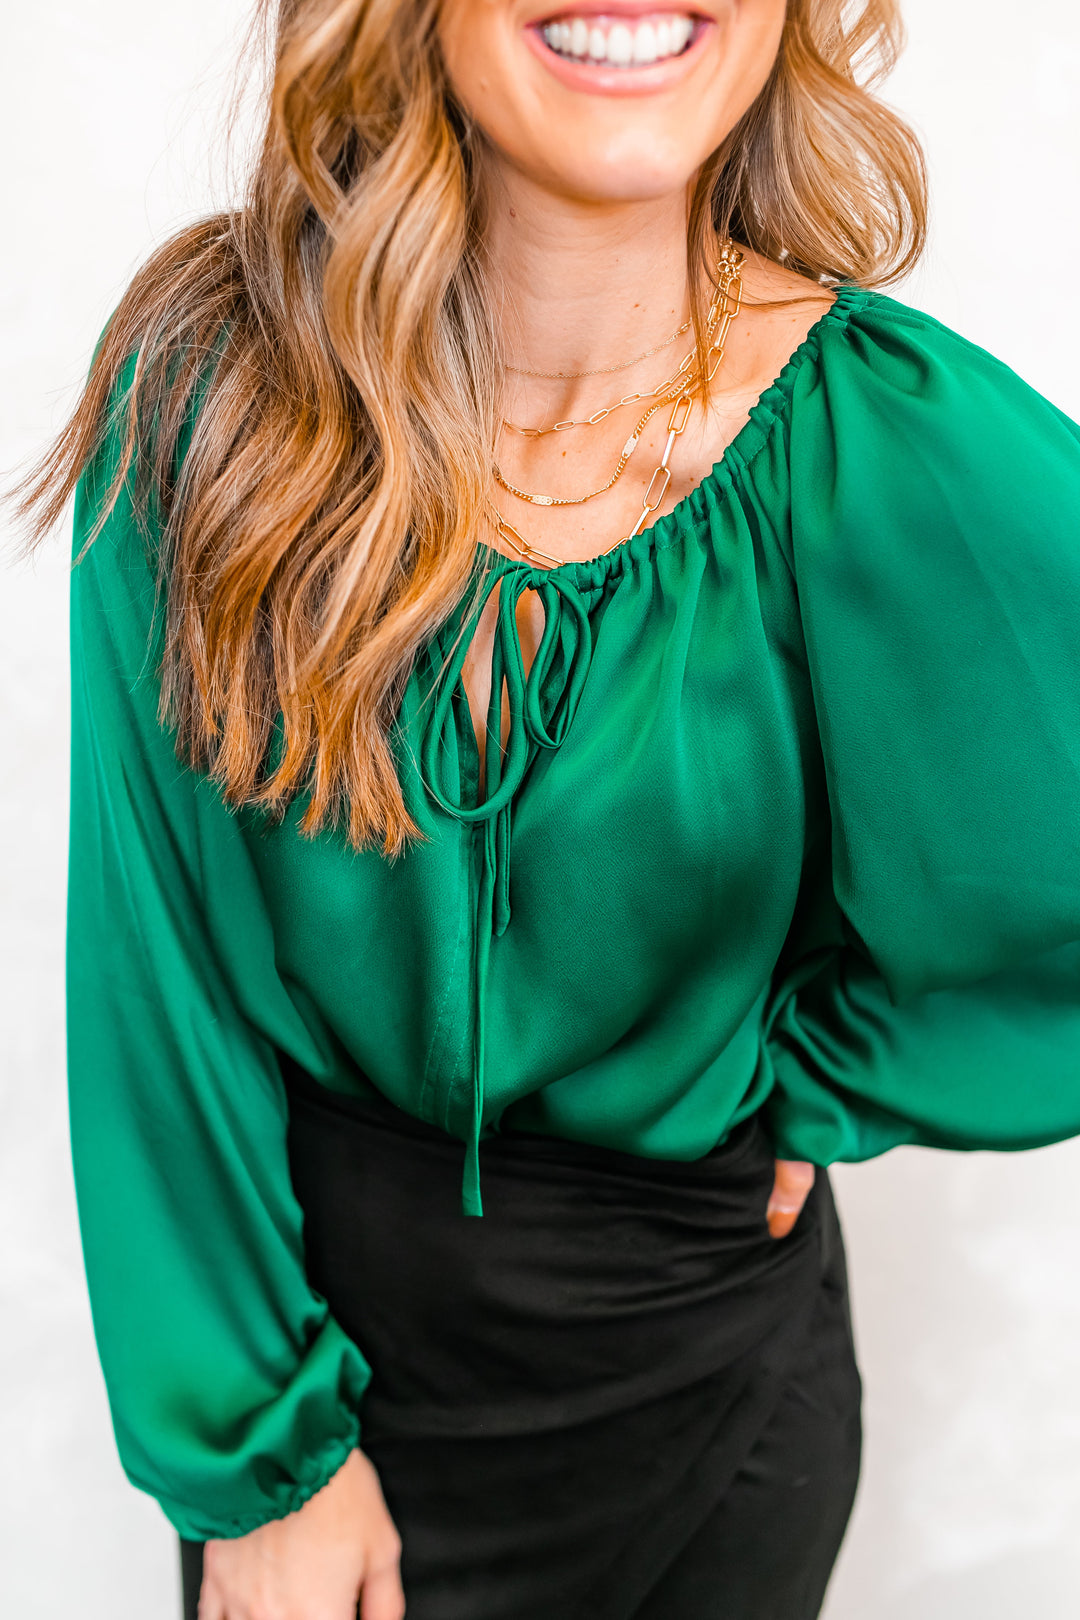 The Holly Tie Blouse - One Eleven Olive Boutique